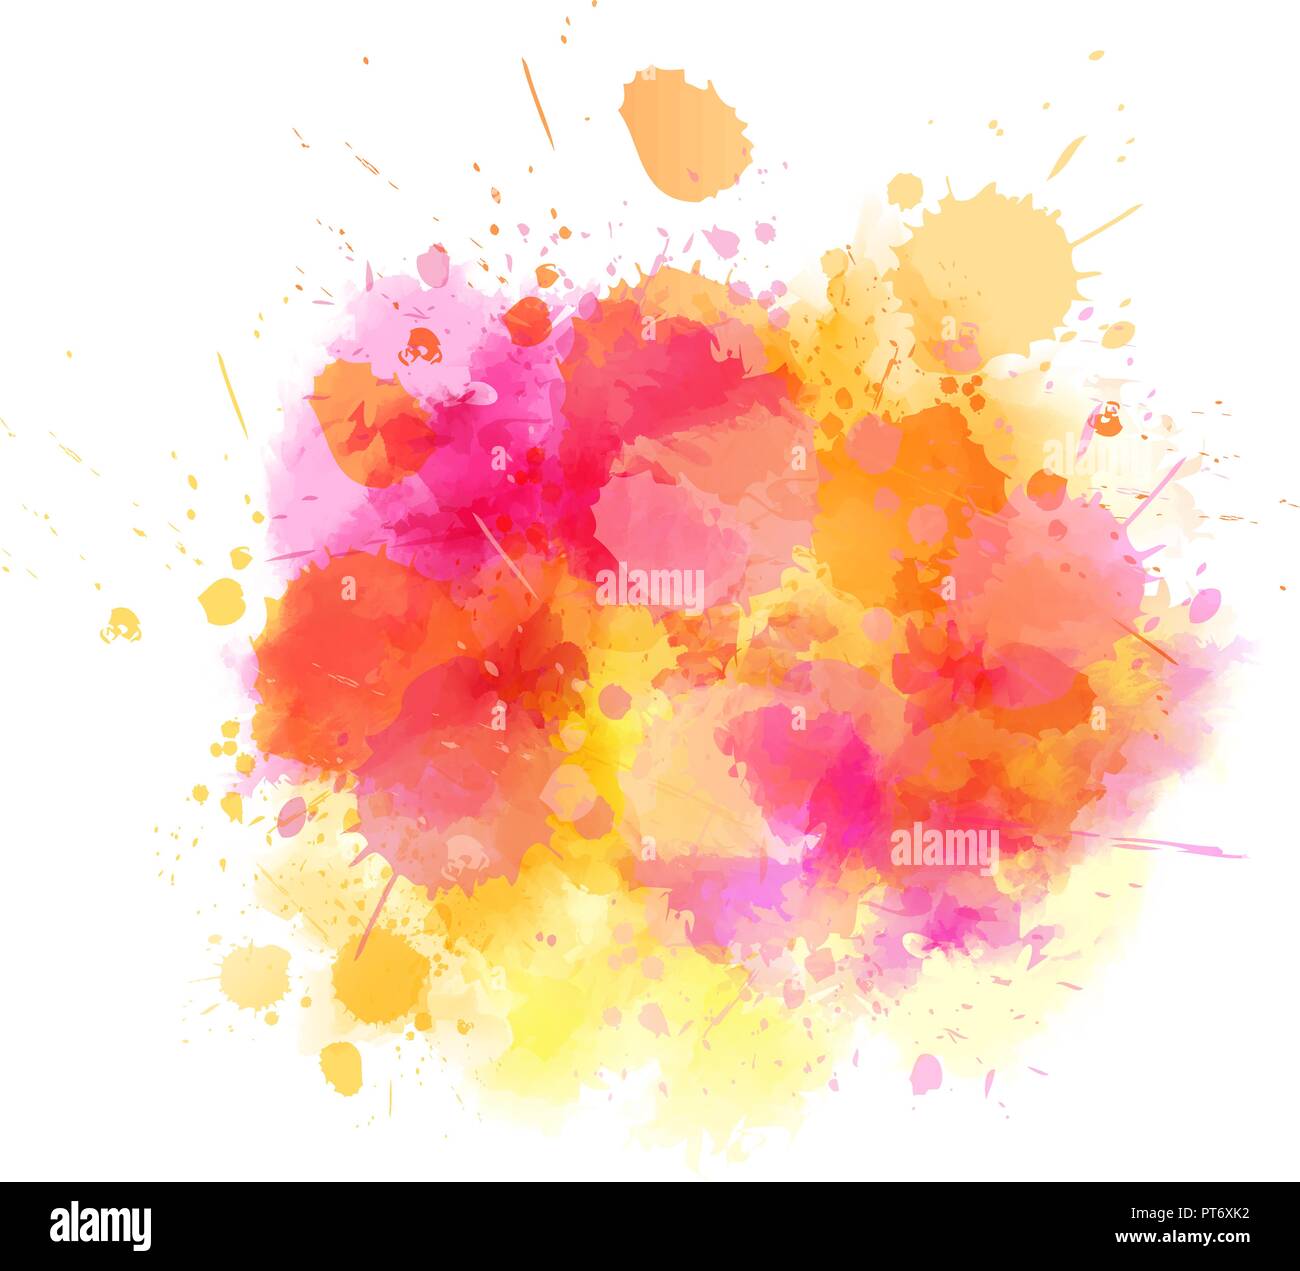 Multicolored watercolor imitation splash blot in yellow and pink colors. Stock Vector